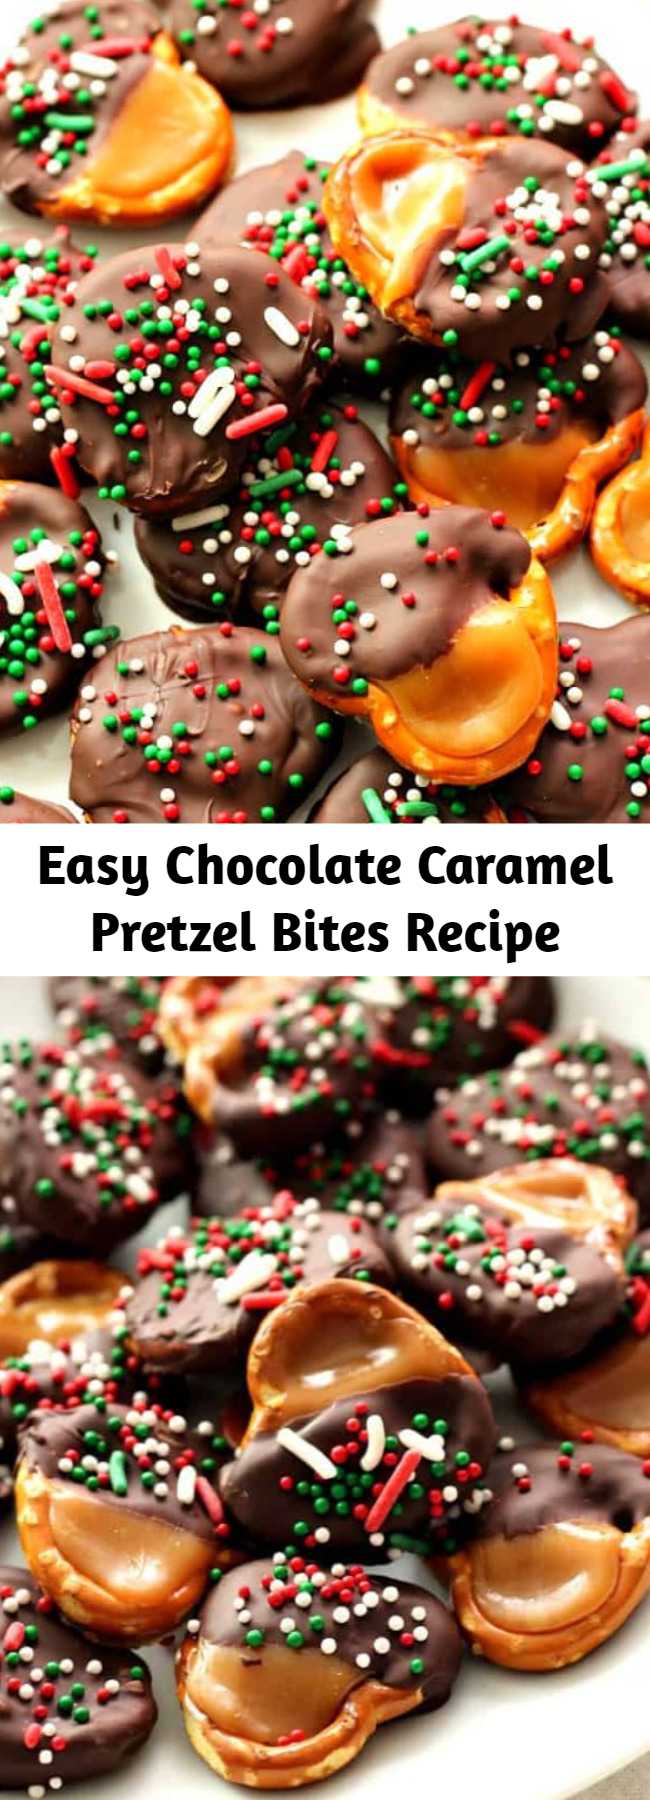 Easy Chocolate Caramel Pretzel Bites Recipe - Super easy candy idea for the holidays! Great gift for chocolate and caramel lovers! 